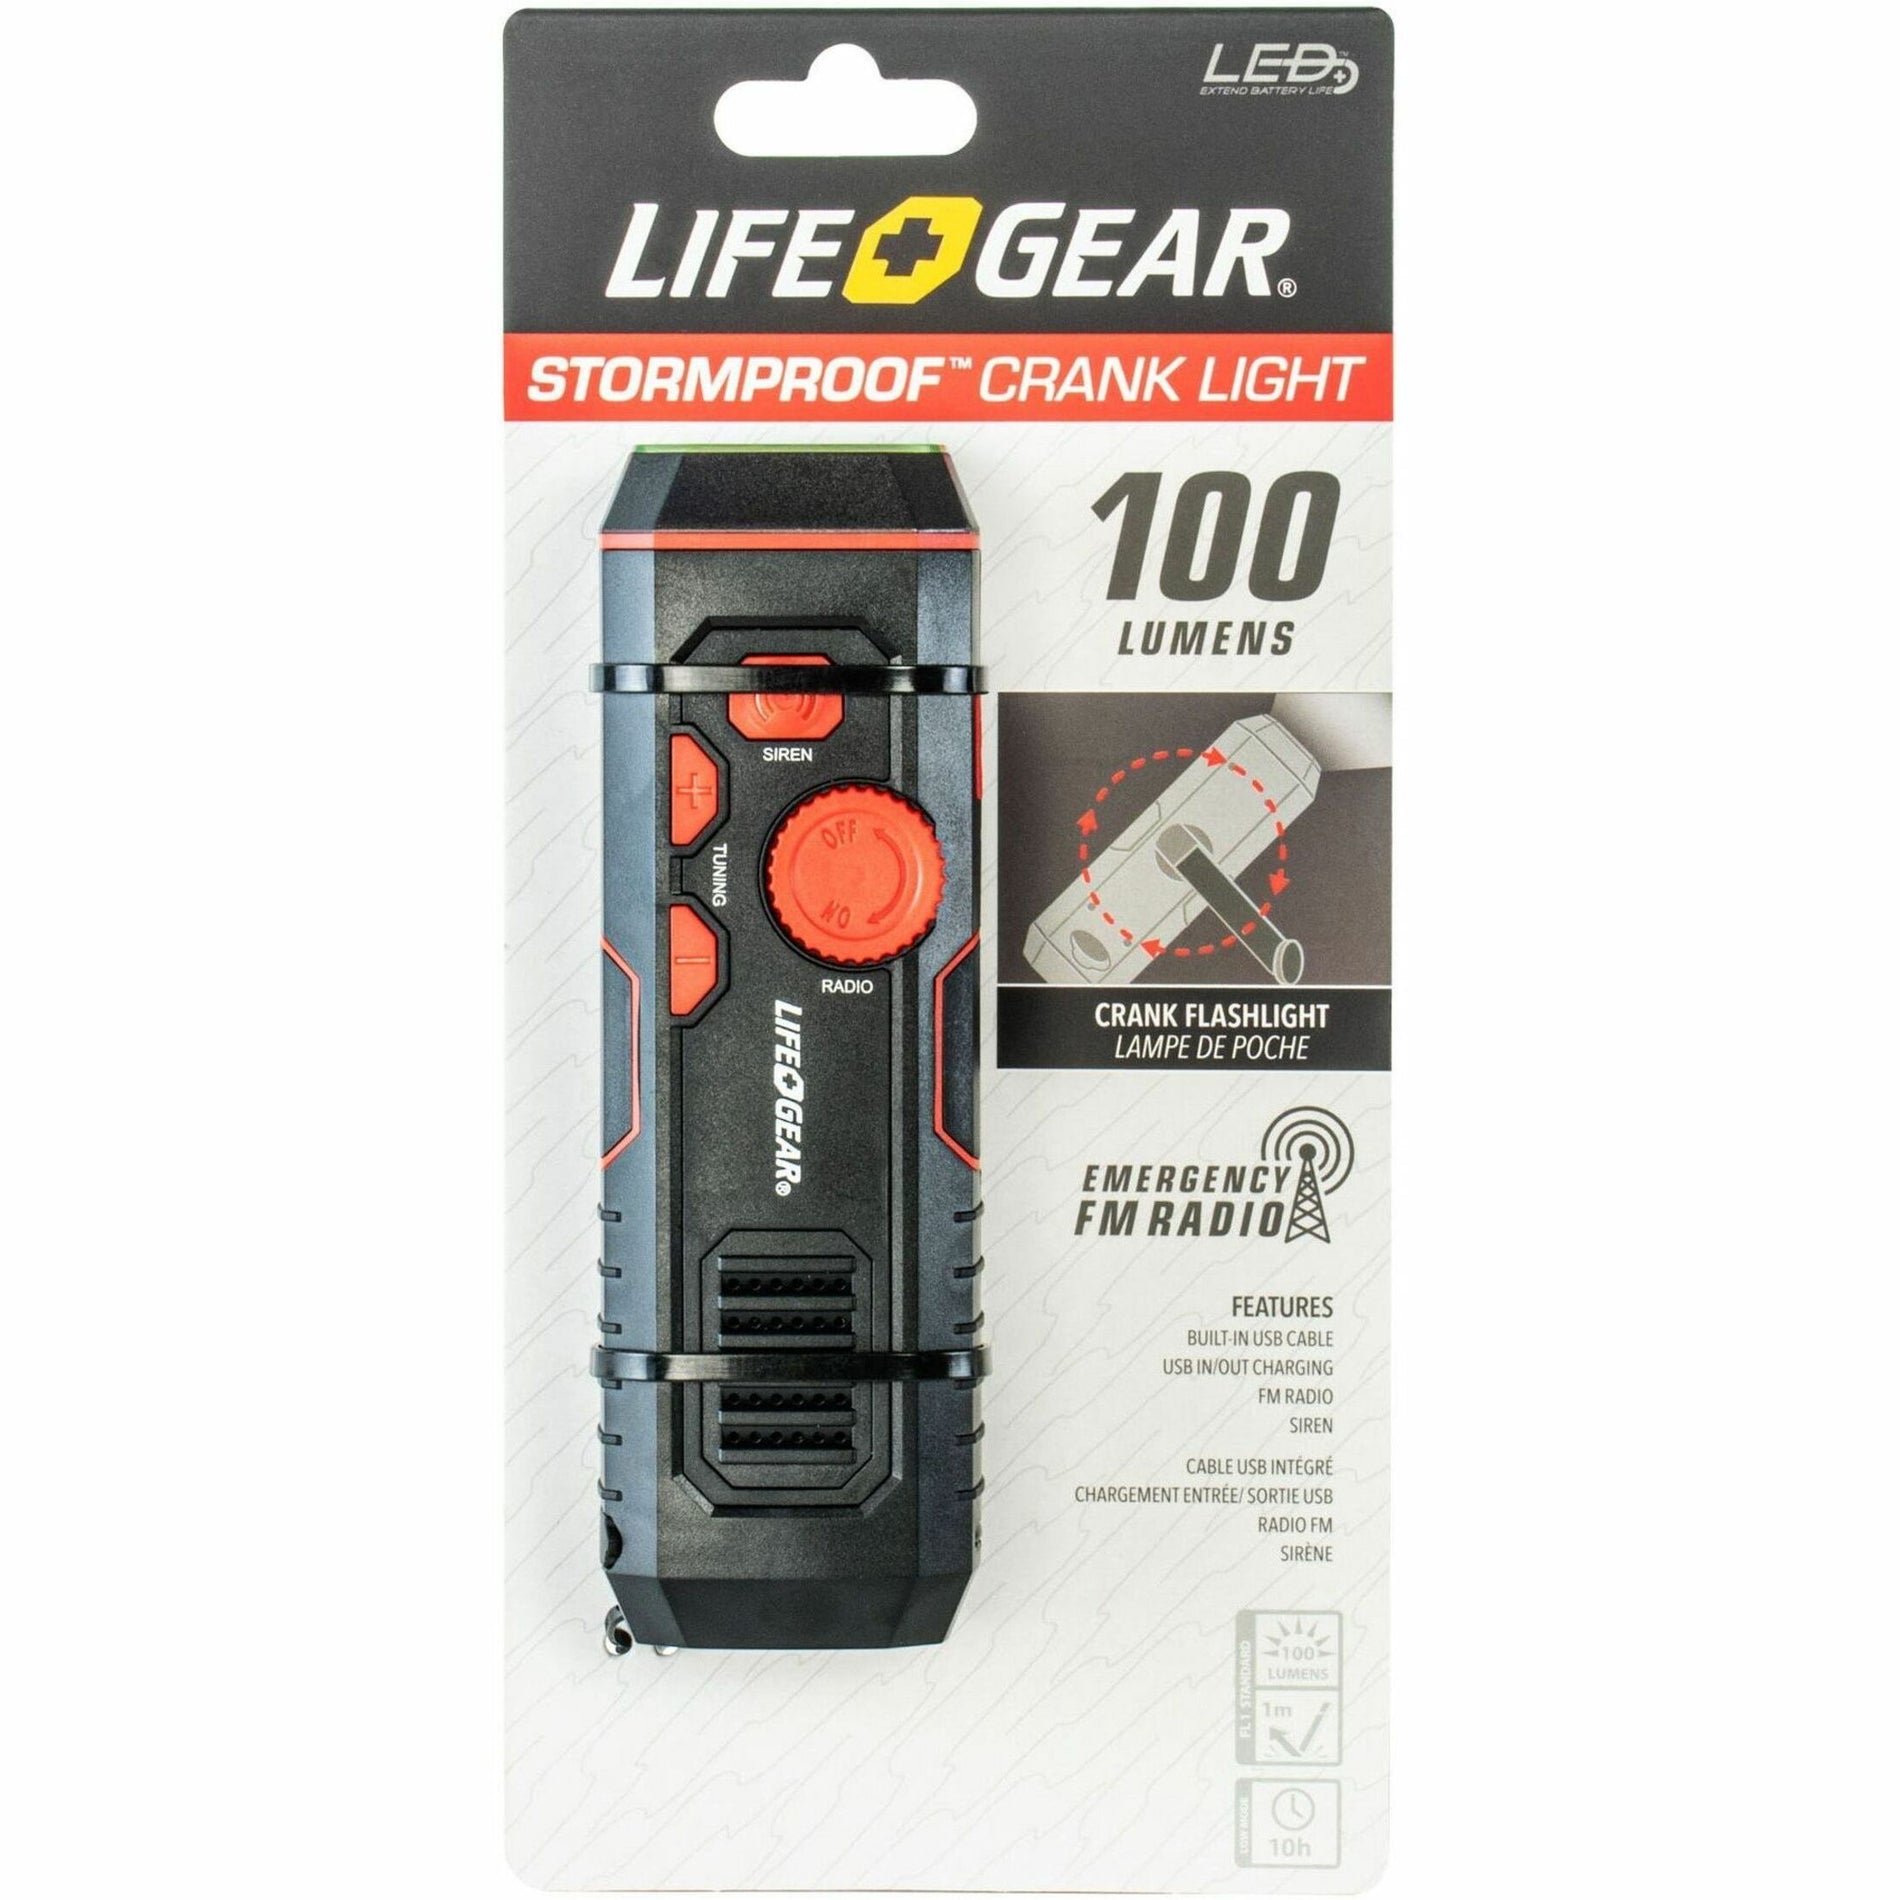 Life+Gear LG3860675RED Stormproof Crank Light, Water Proof, Water Resistant, Impact Resistant, Siren, Radio, Cell Phone Charger